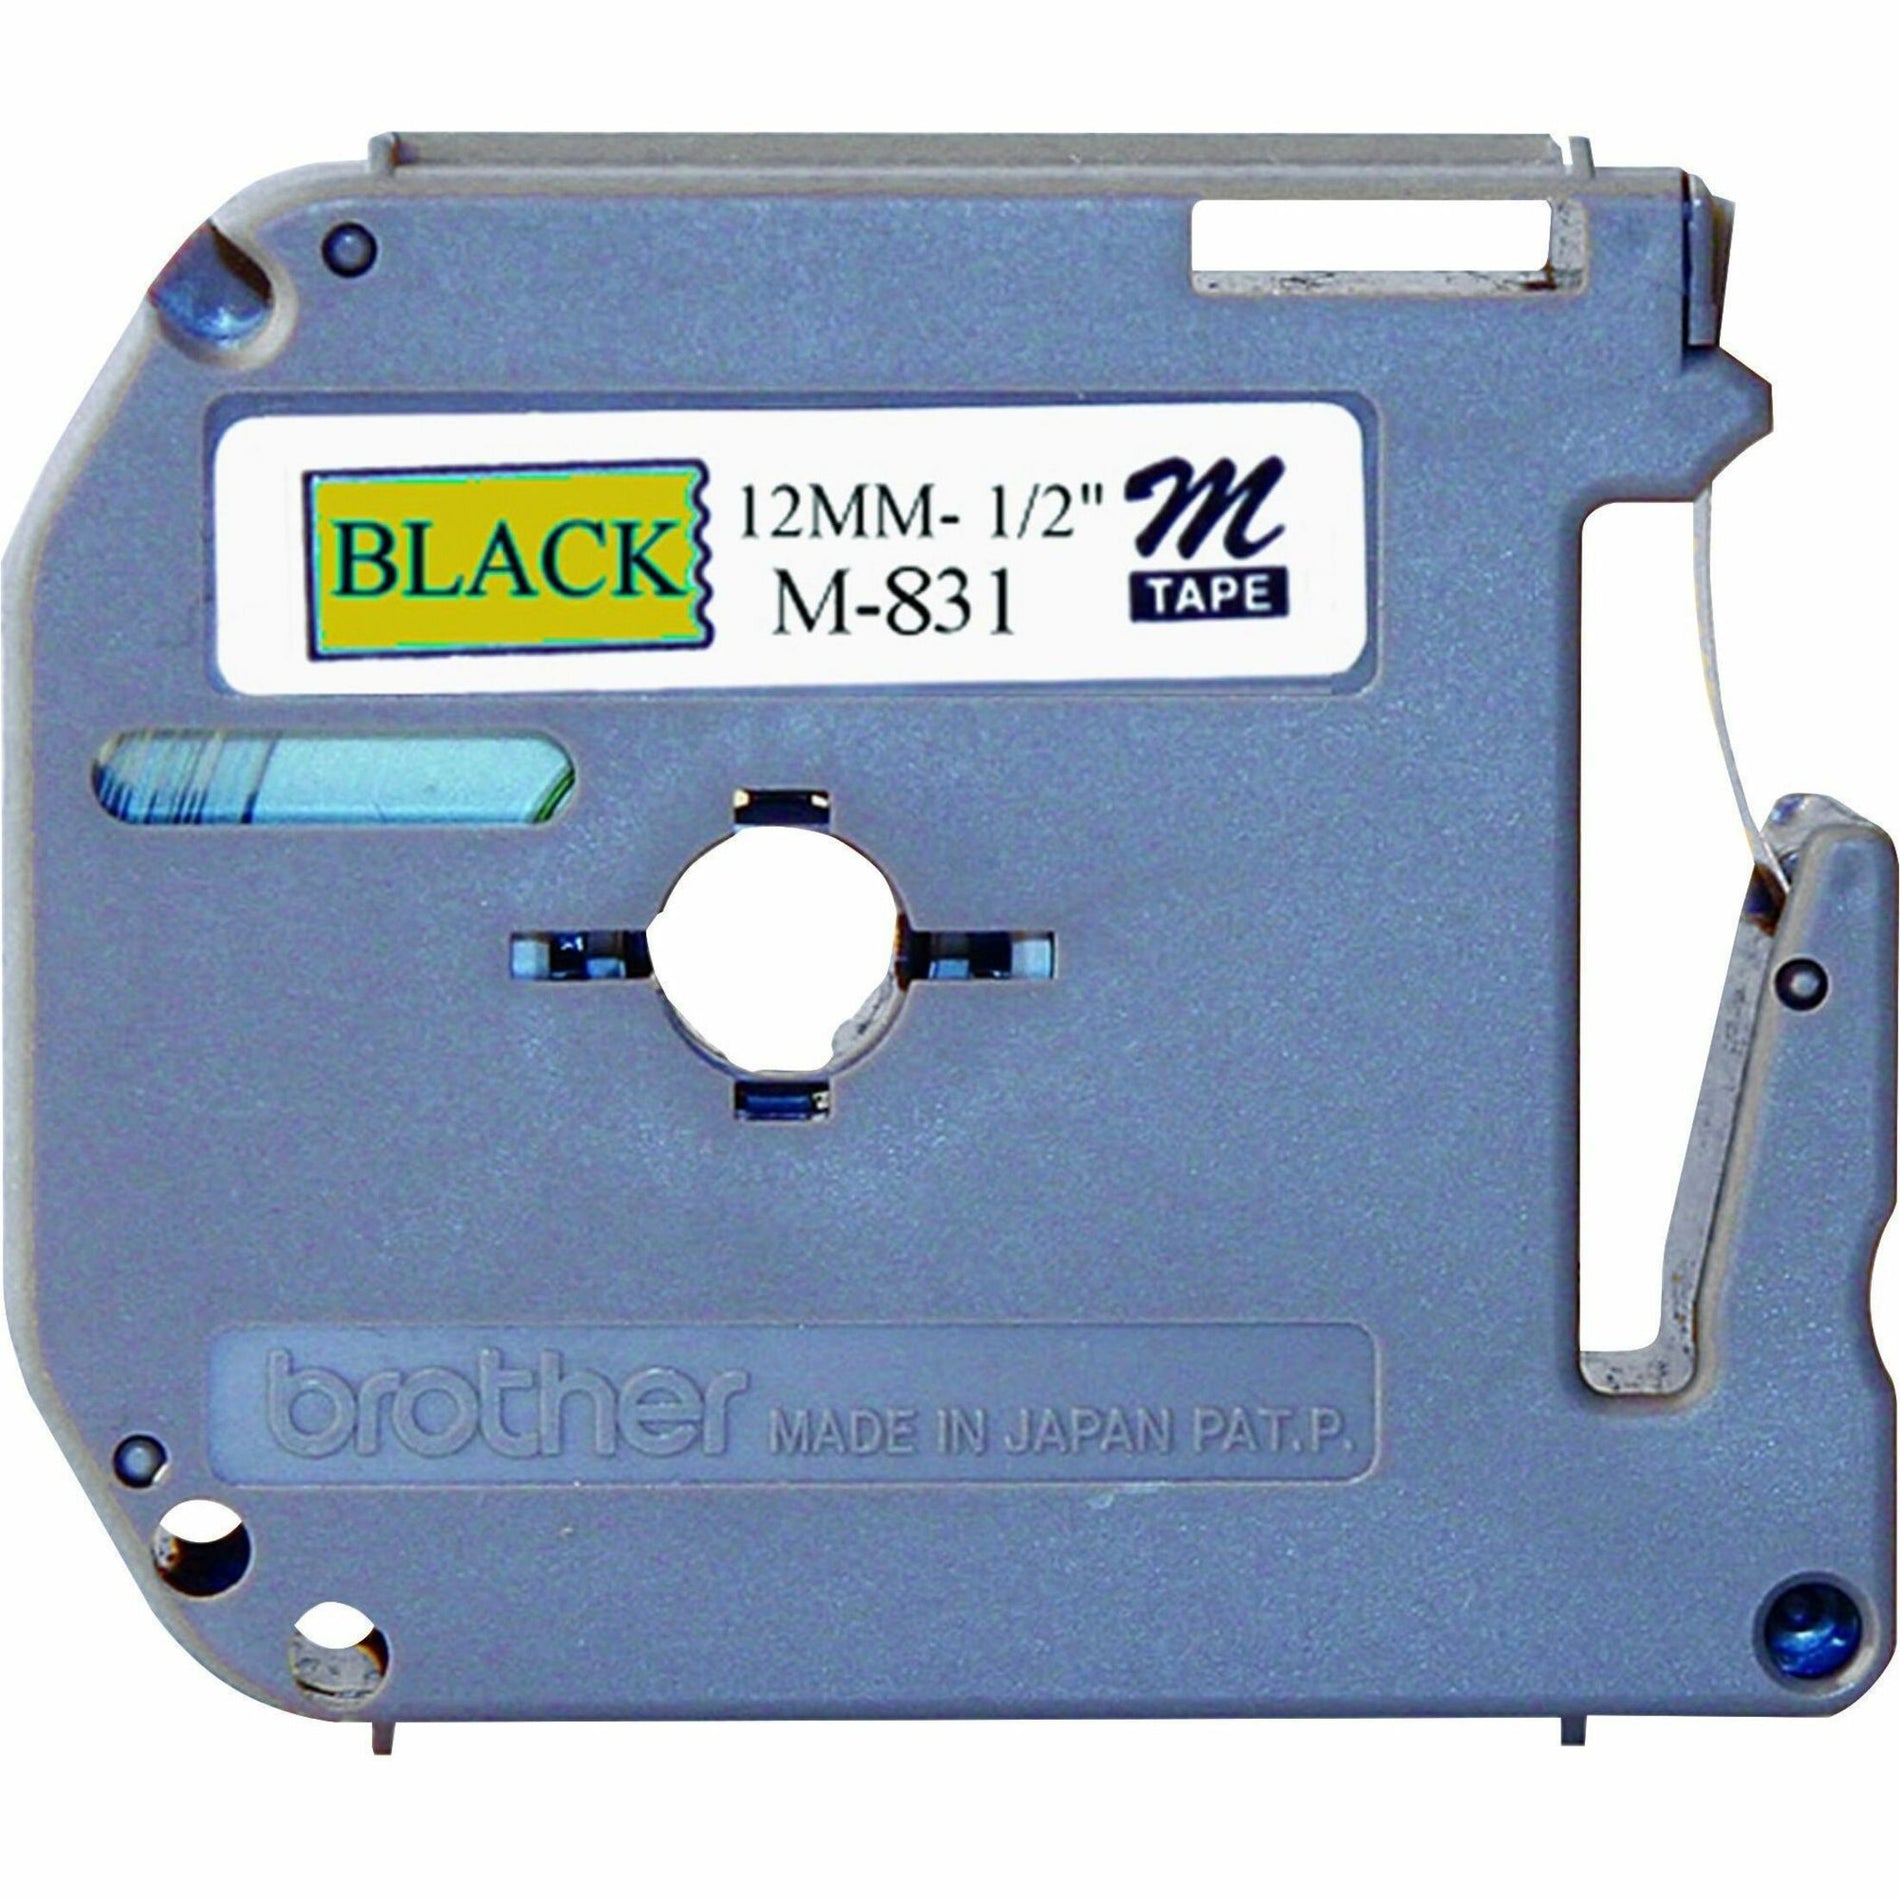 Brother M831 P-touch Nonlaminated Label Tape, 1/2" Size, Black/Gold